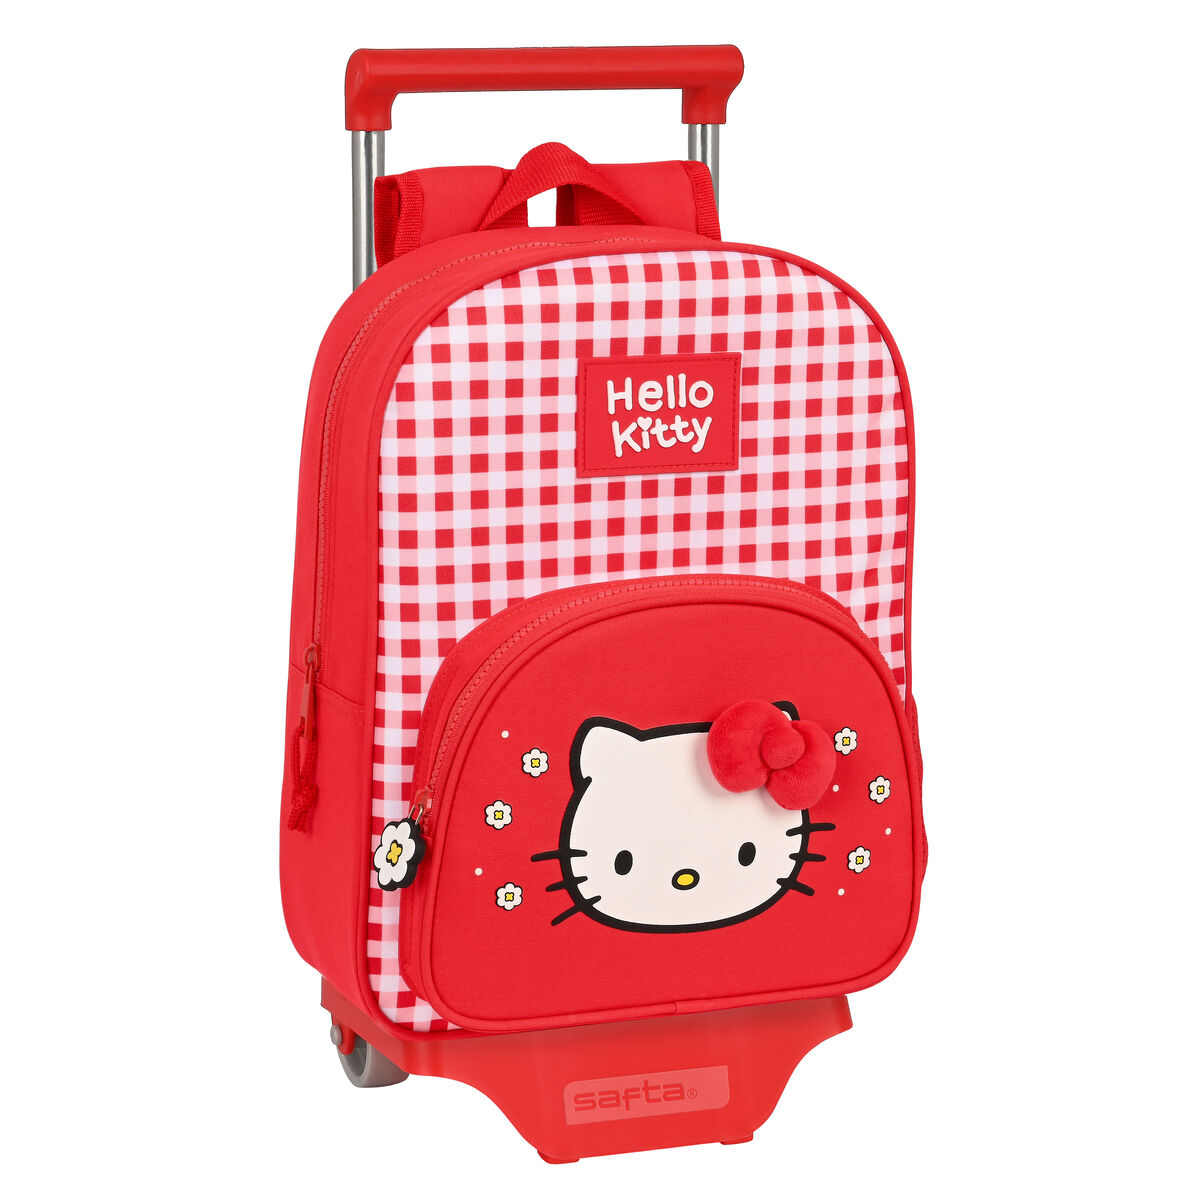 Cartable à roulettes Hello Kitty Spring Rouge (26 x 34 x 11 cm)